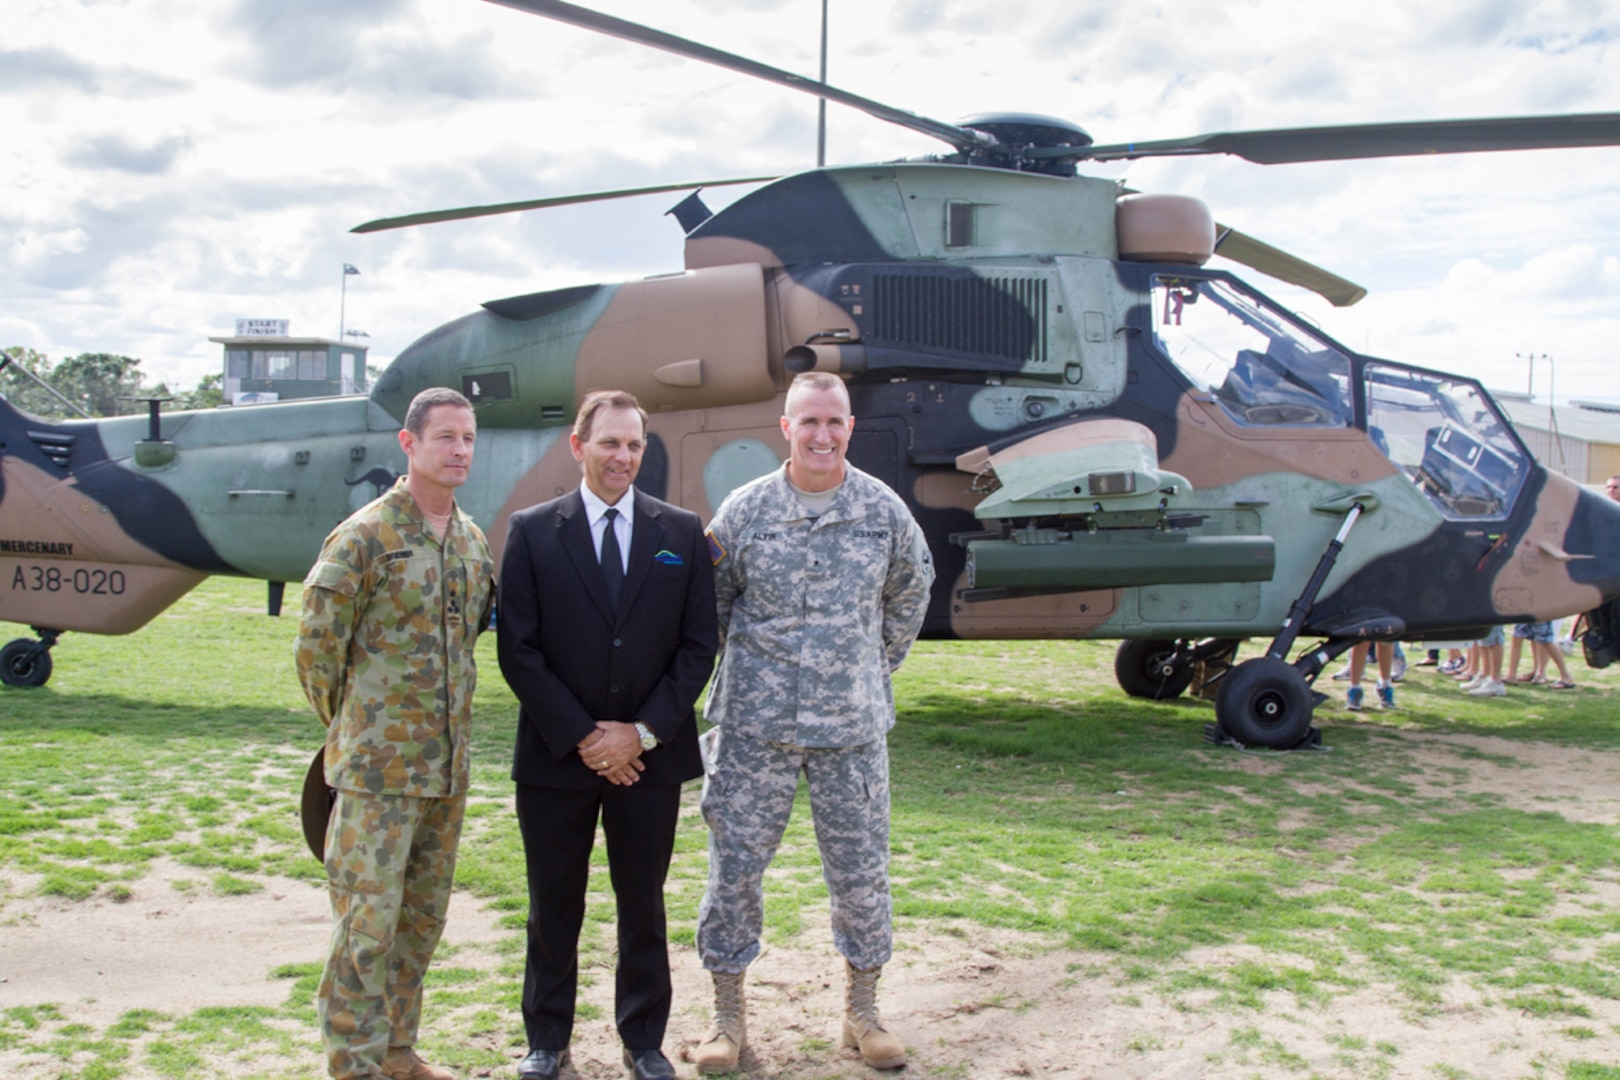 ROCKHAMPTON, Australia (July 6, 2015) - Australian Brigadier Mark Brewer (Left), Deputy Mayor of Rockhampton Tony Williams (Center), and U.S. Army Brigadier General Brian Alvin pose for a photo in front of an Australian Tiger Attack Helicopter during the Exercise Talisman Sabre 15 Open Day Ceremony. The event had service members from U.S., Australian and New Zealand militaries, static displays, military history re-enactors and cultural displays. The exercise is a biennial event where all militaries practice their interoperability skill and to strengthen the partnership between the forces. 